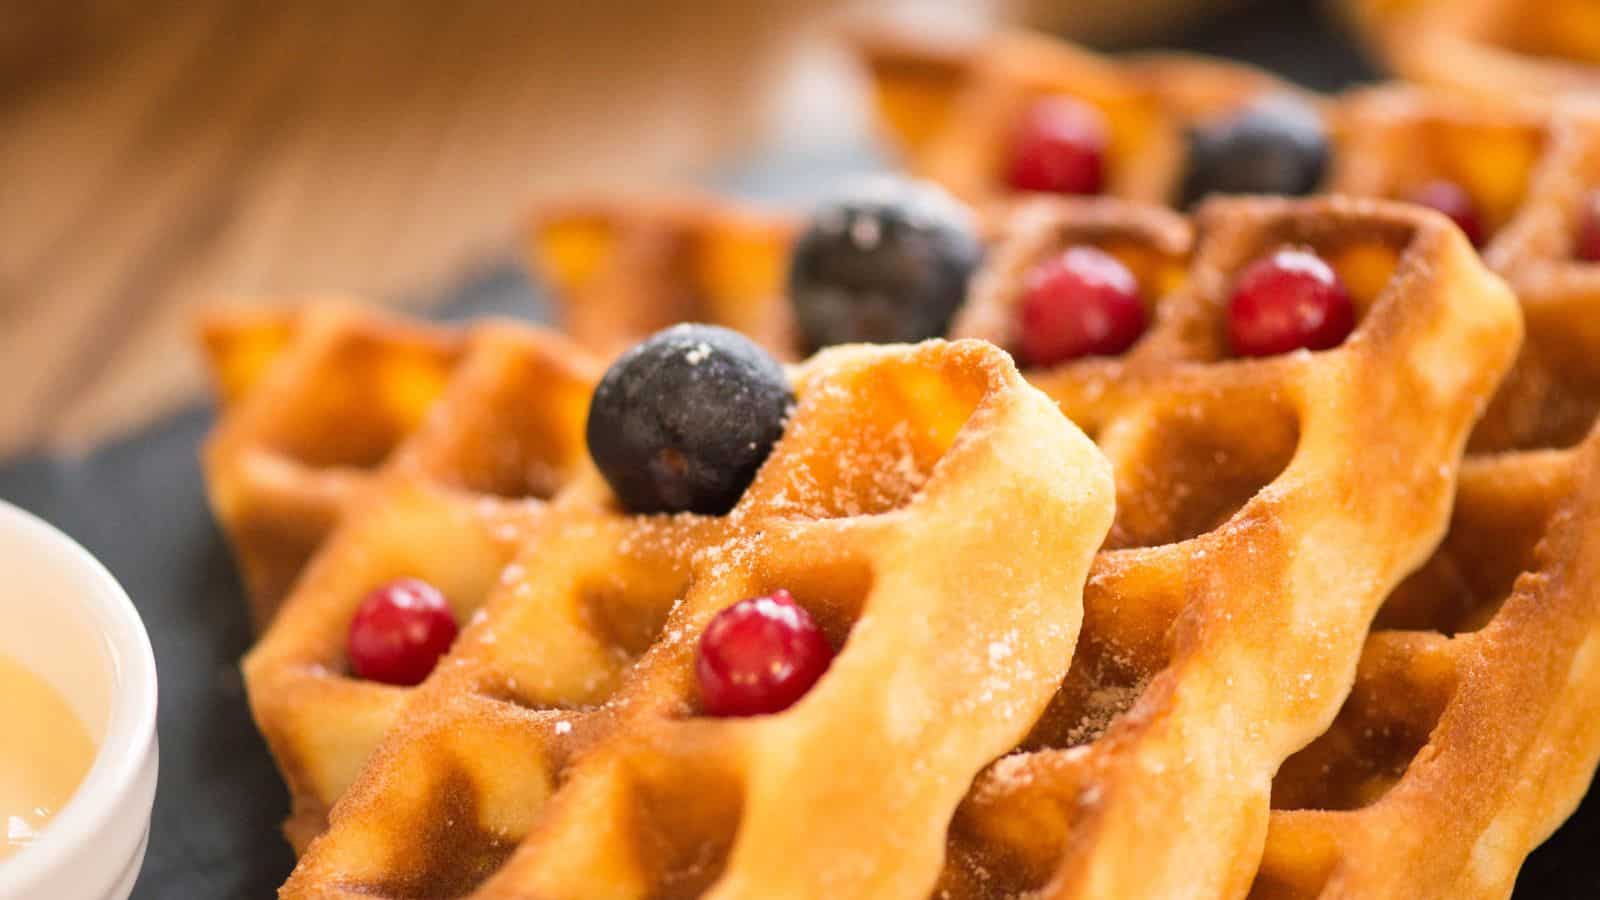 Waffles with vanilla syrup for breakfast with berries.